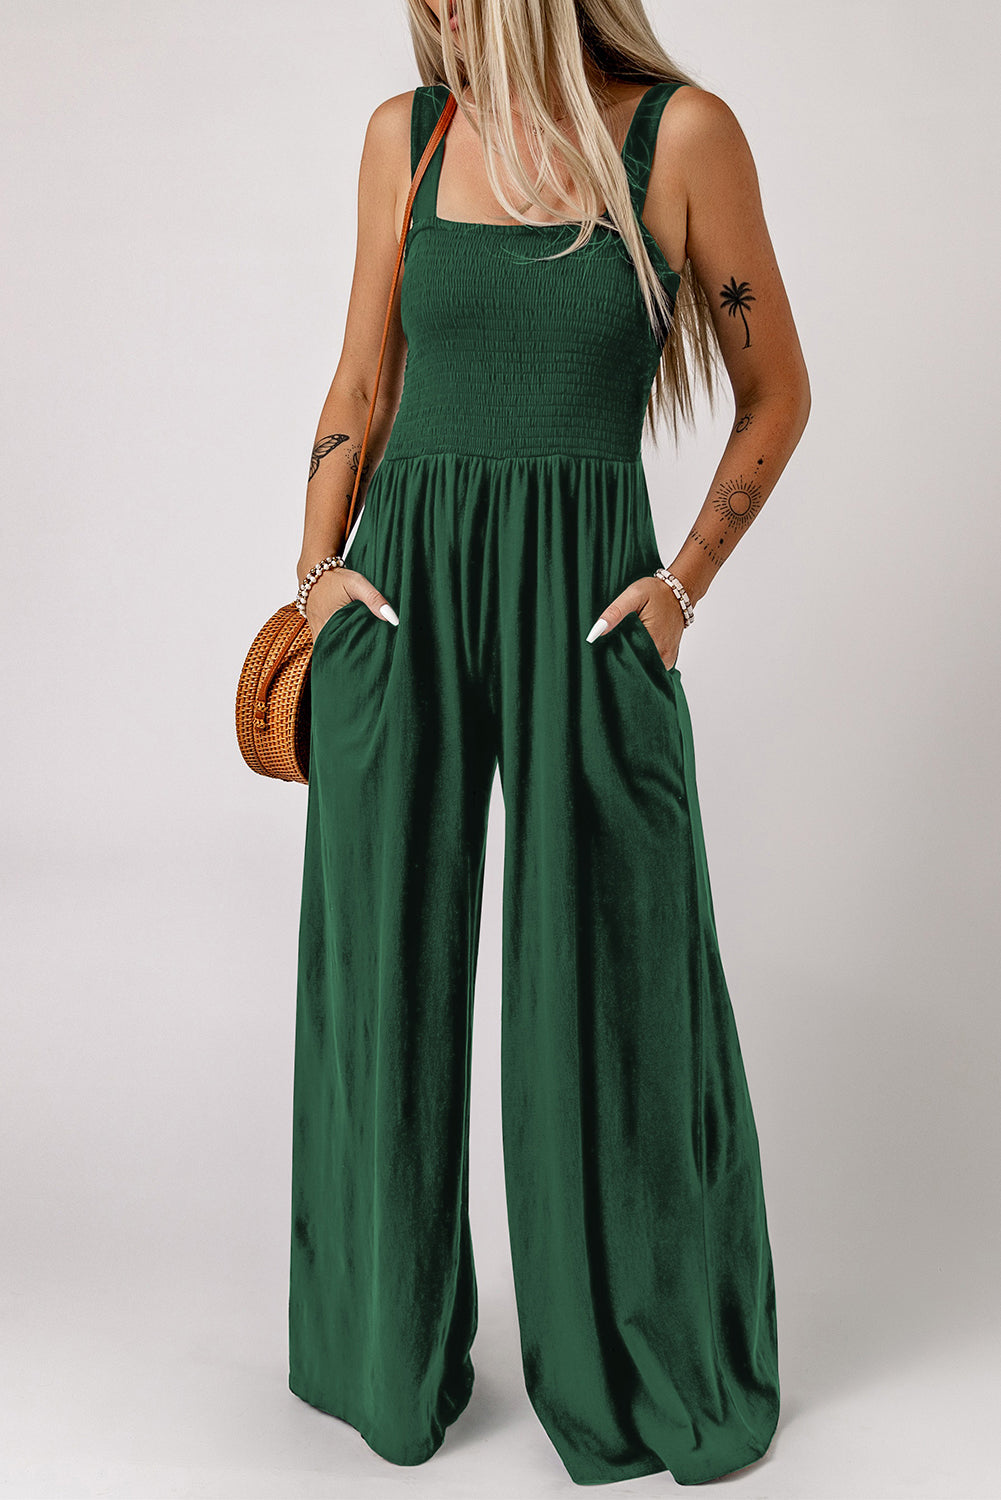 Smocked Square Neck Wide Leg Jumpsuit with Pockets Sunset and Swim Green S 